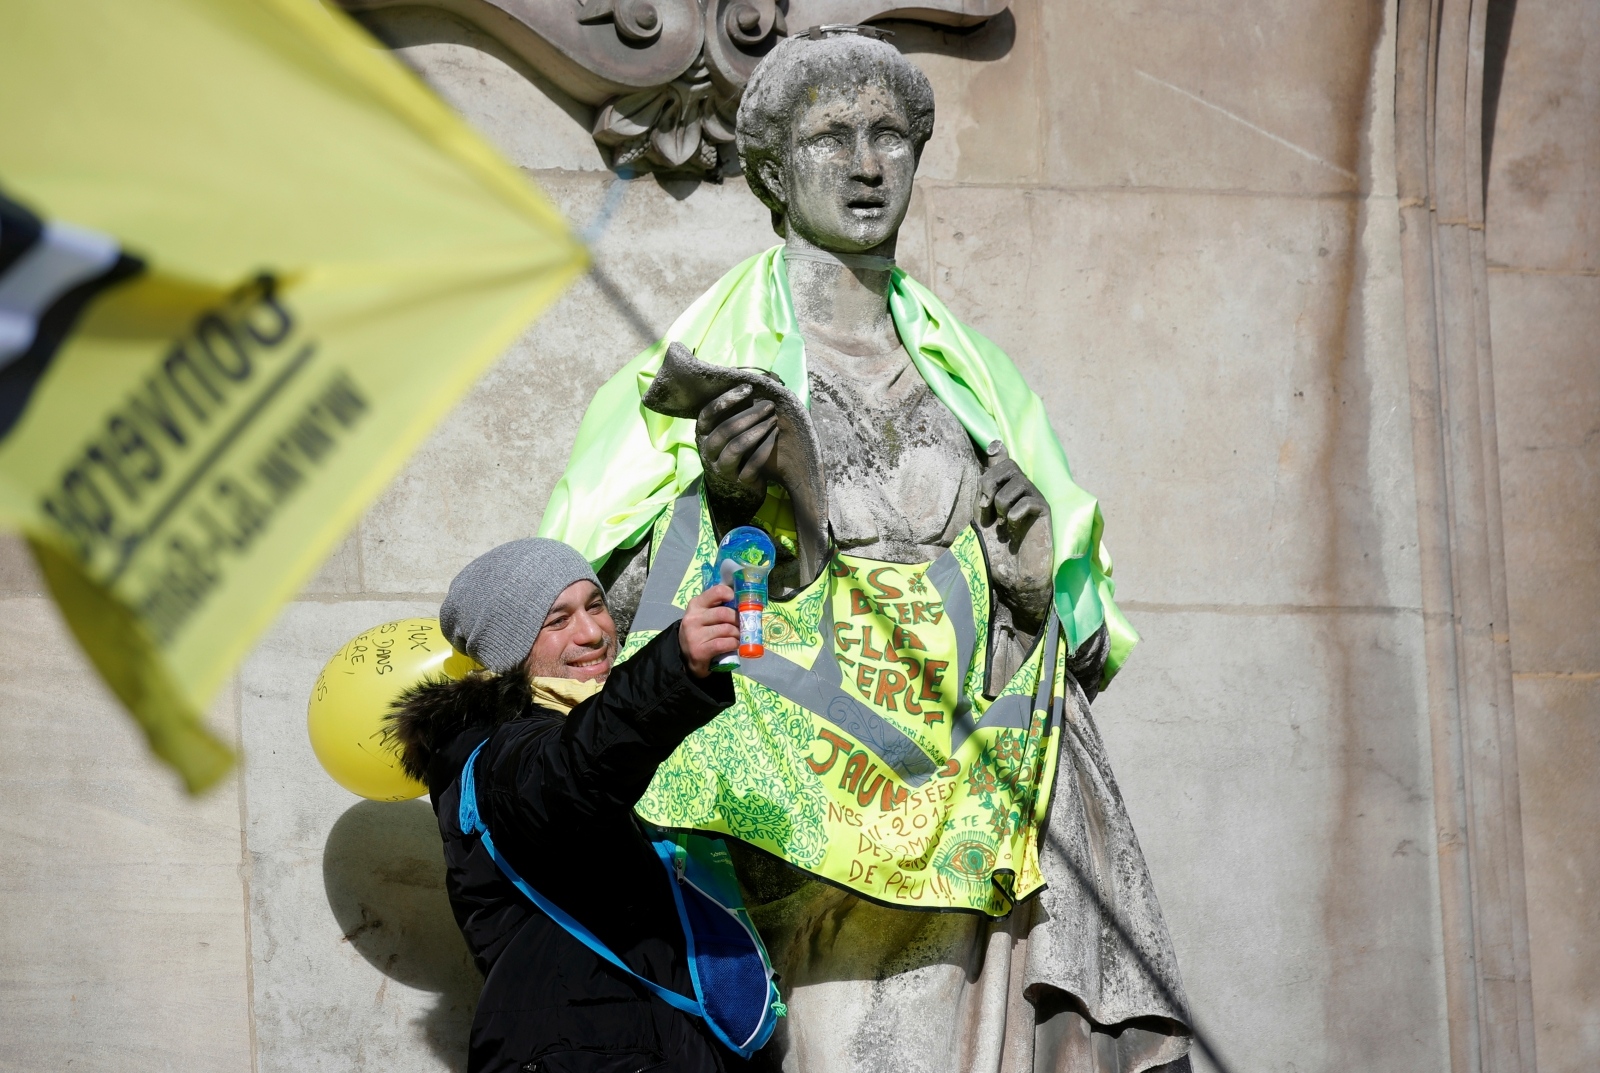 Demonstration against French government's pensions reform plan in Paris A protester stands next to a statue dressed in a yellow vest in front of the Opera Garnier during a demonstration before the opening debate on the French government's pensions reform bill at the National Assembly in Paris, France, February 17, 2020. REUTERS/Charles Platiau CHARLES PLATIAU